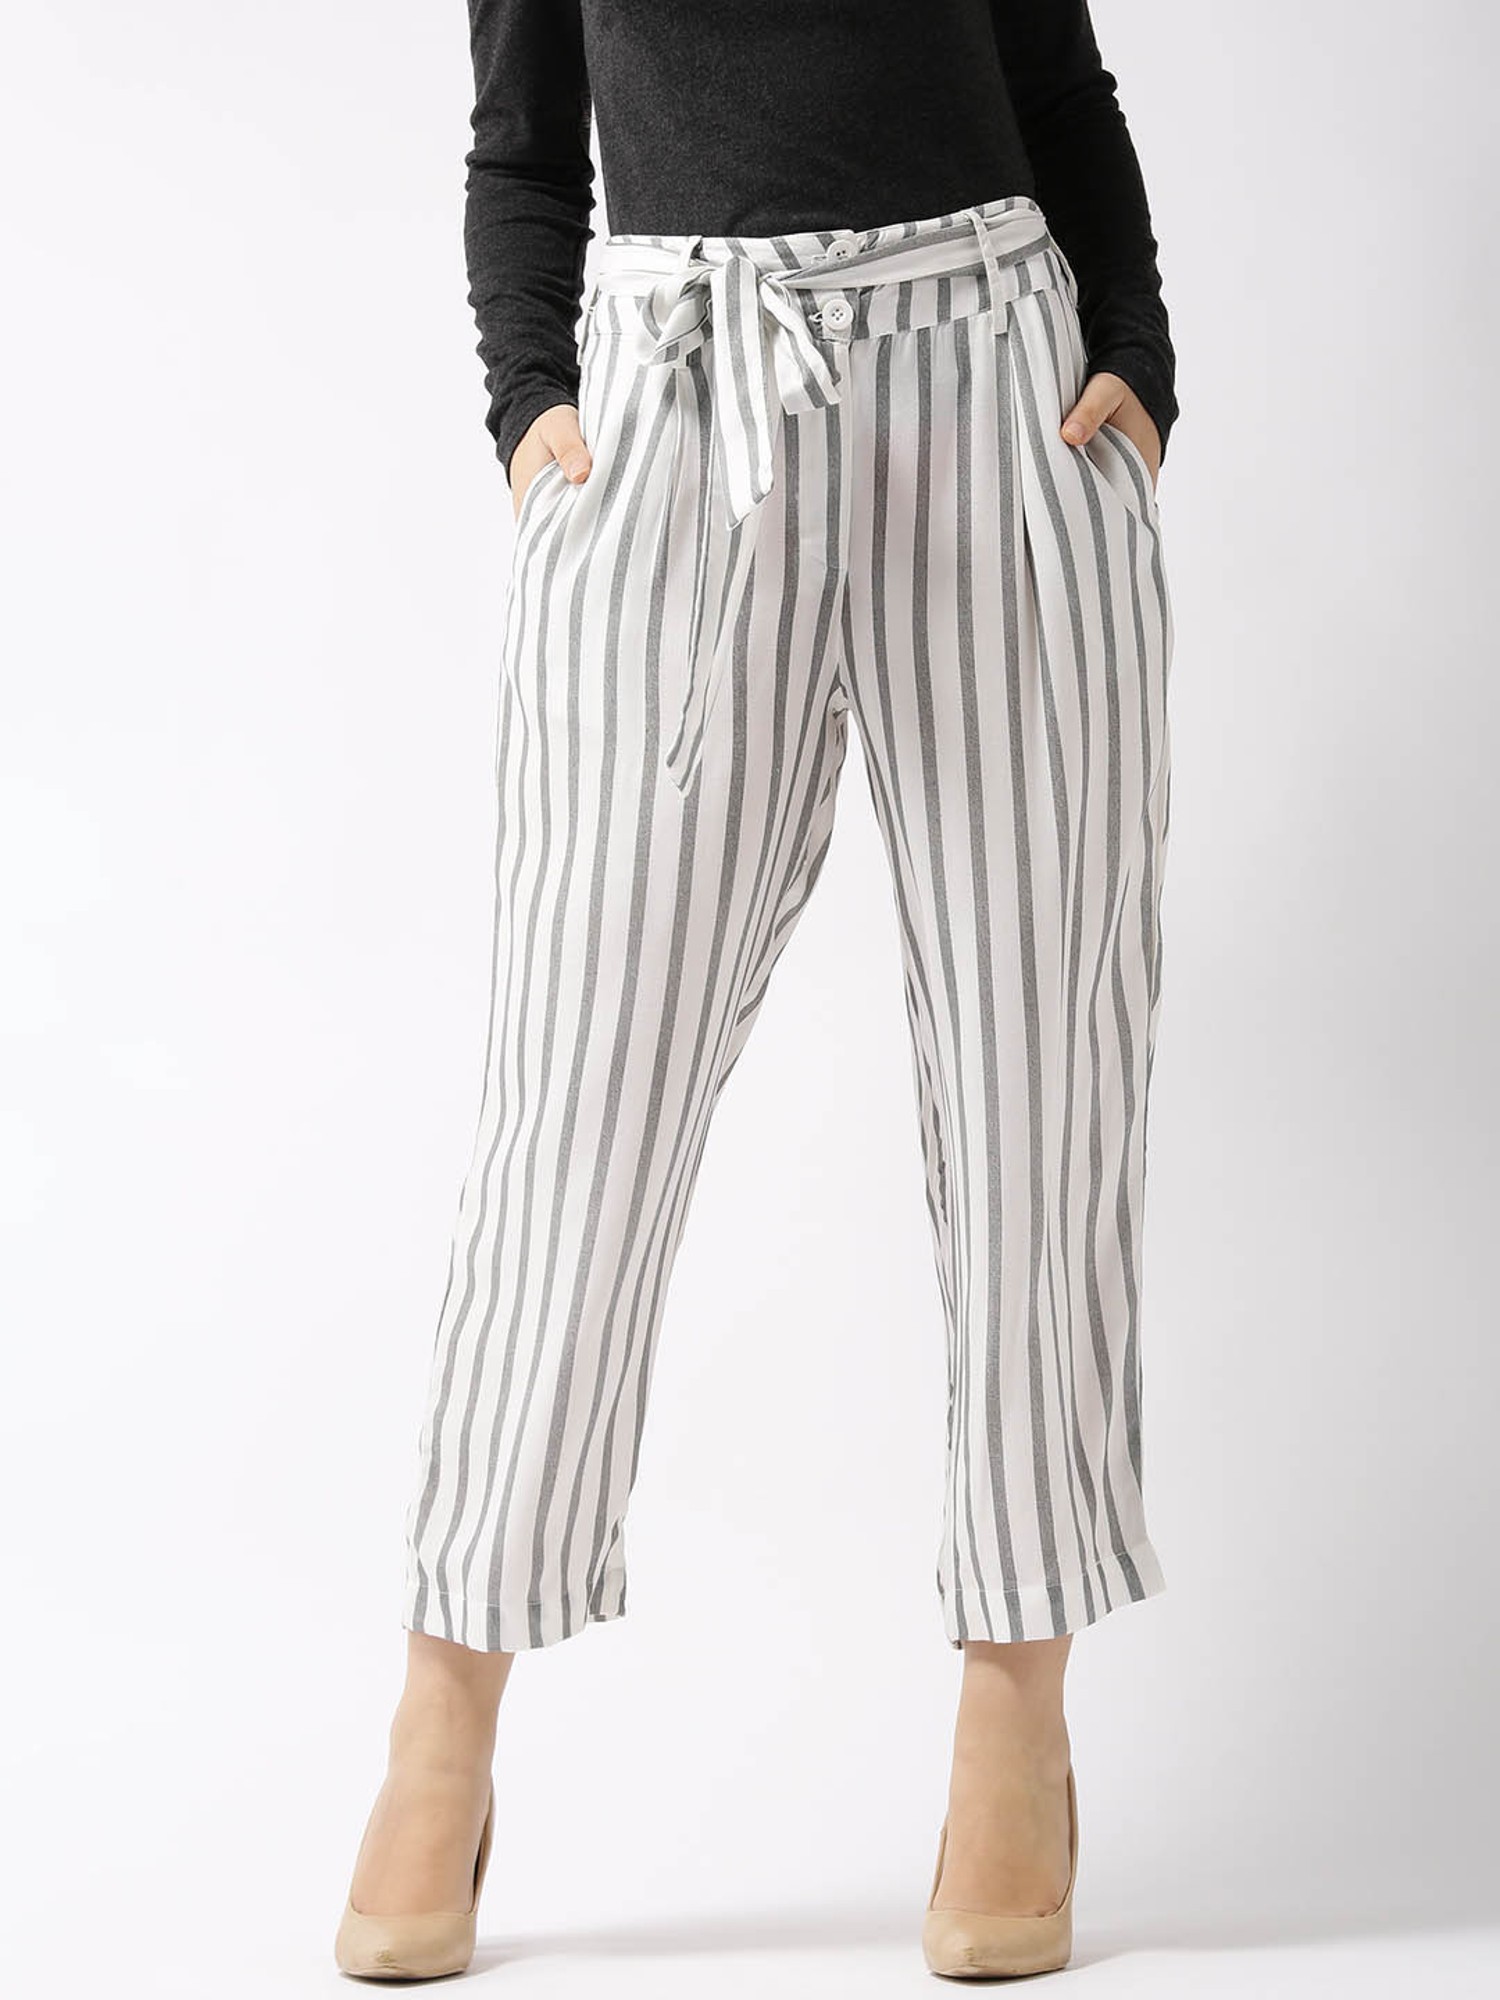 Buy Pink and Gray Cotton Stripe Women Pant for Best Price Reviews Free  Shipping